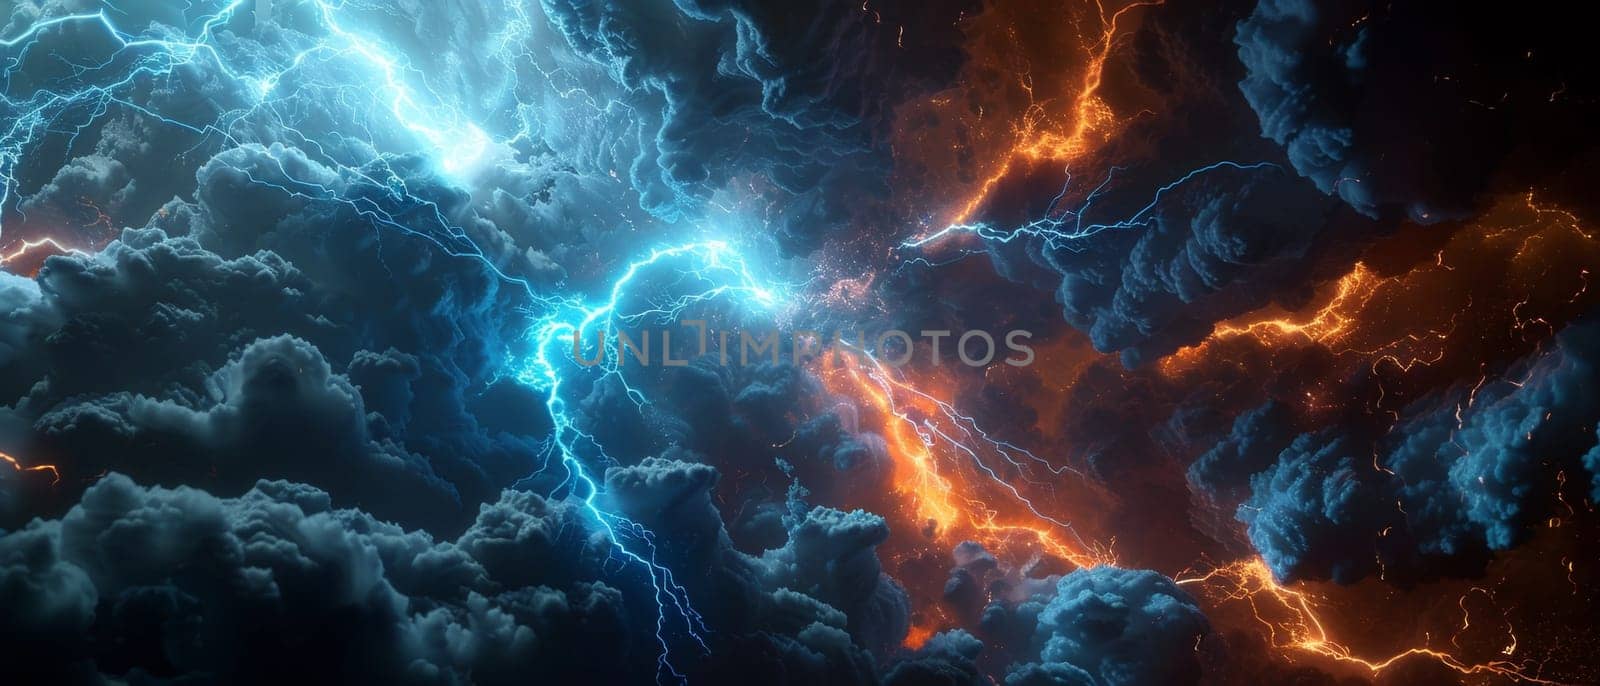 An electrifying widescreen image of dynamic clouds charged with bolts of lightning and fiery energy against a dark sky. 3d rendering colored lightning strike. by sfinks